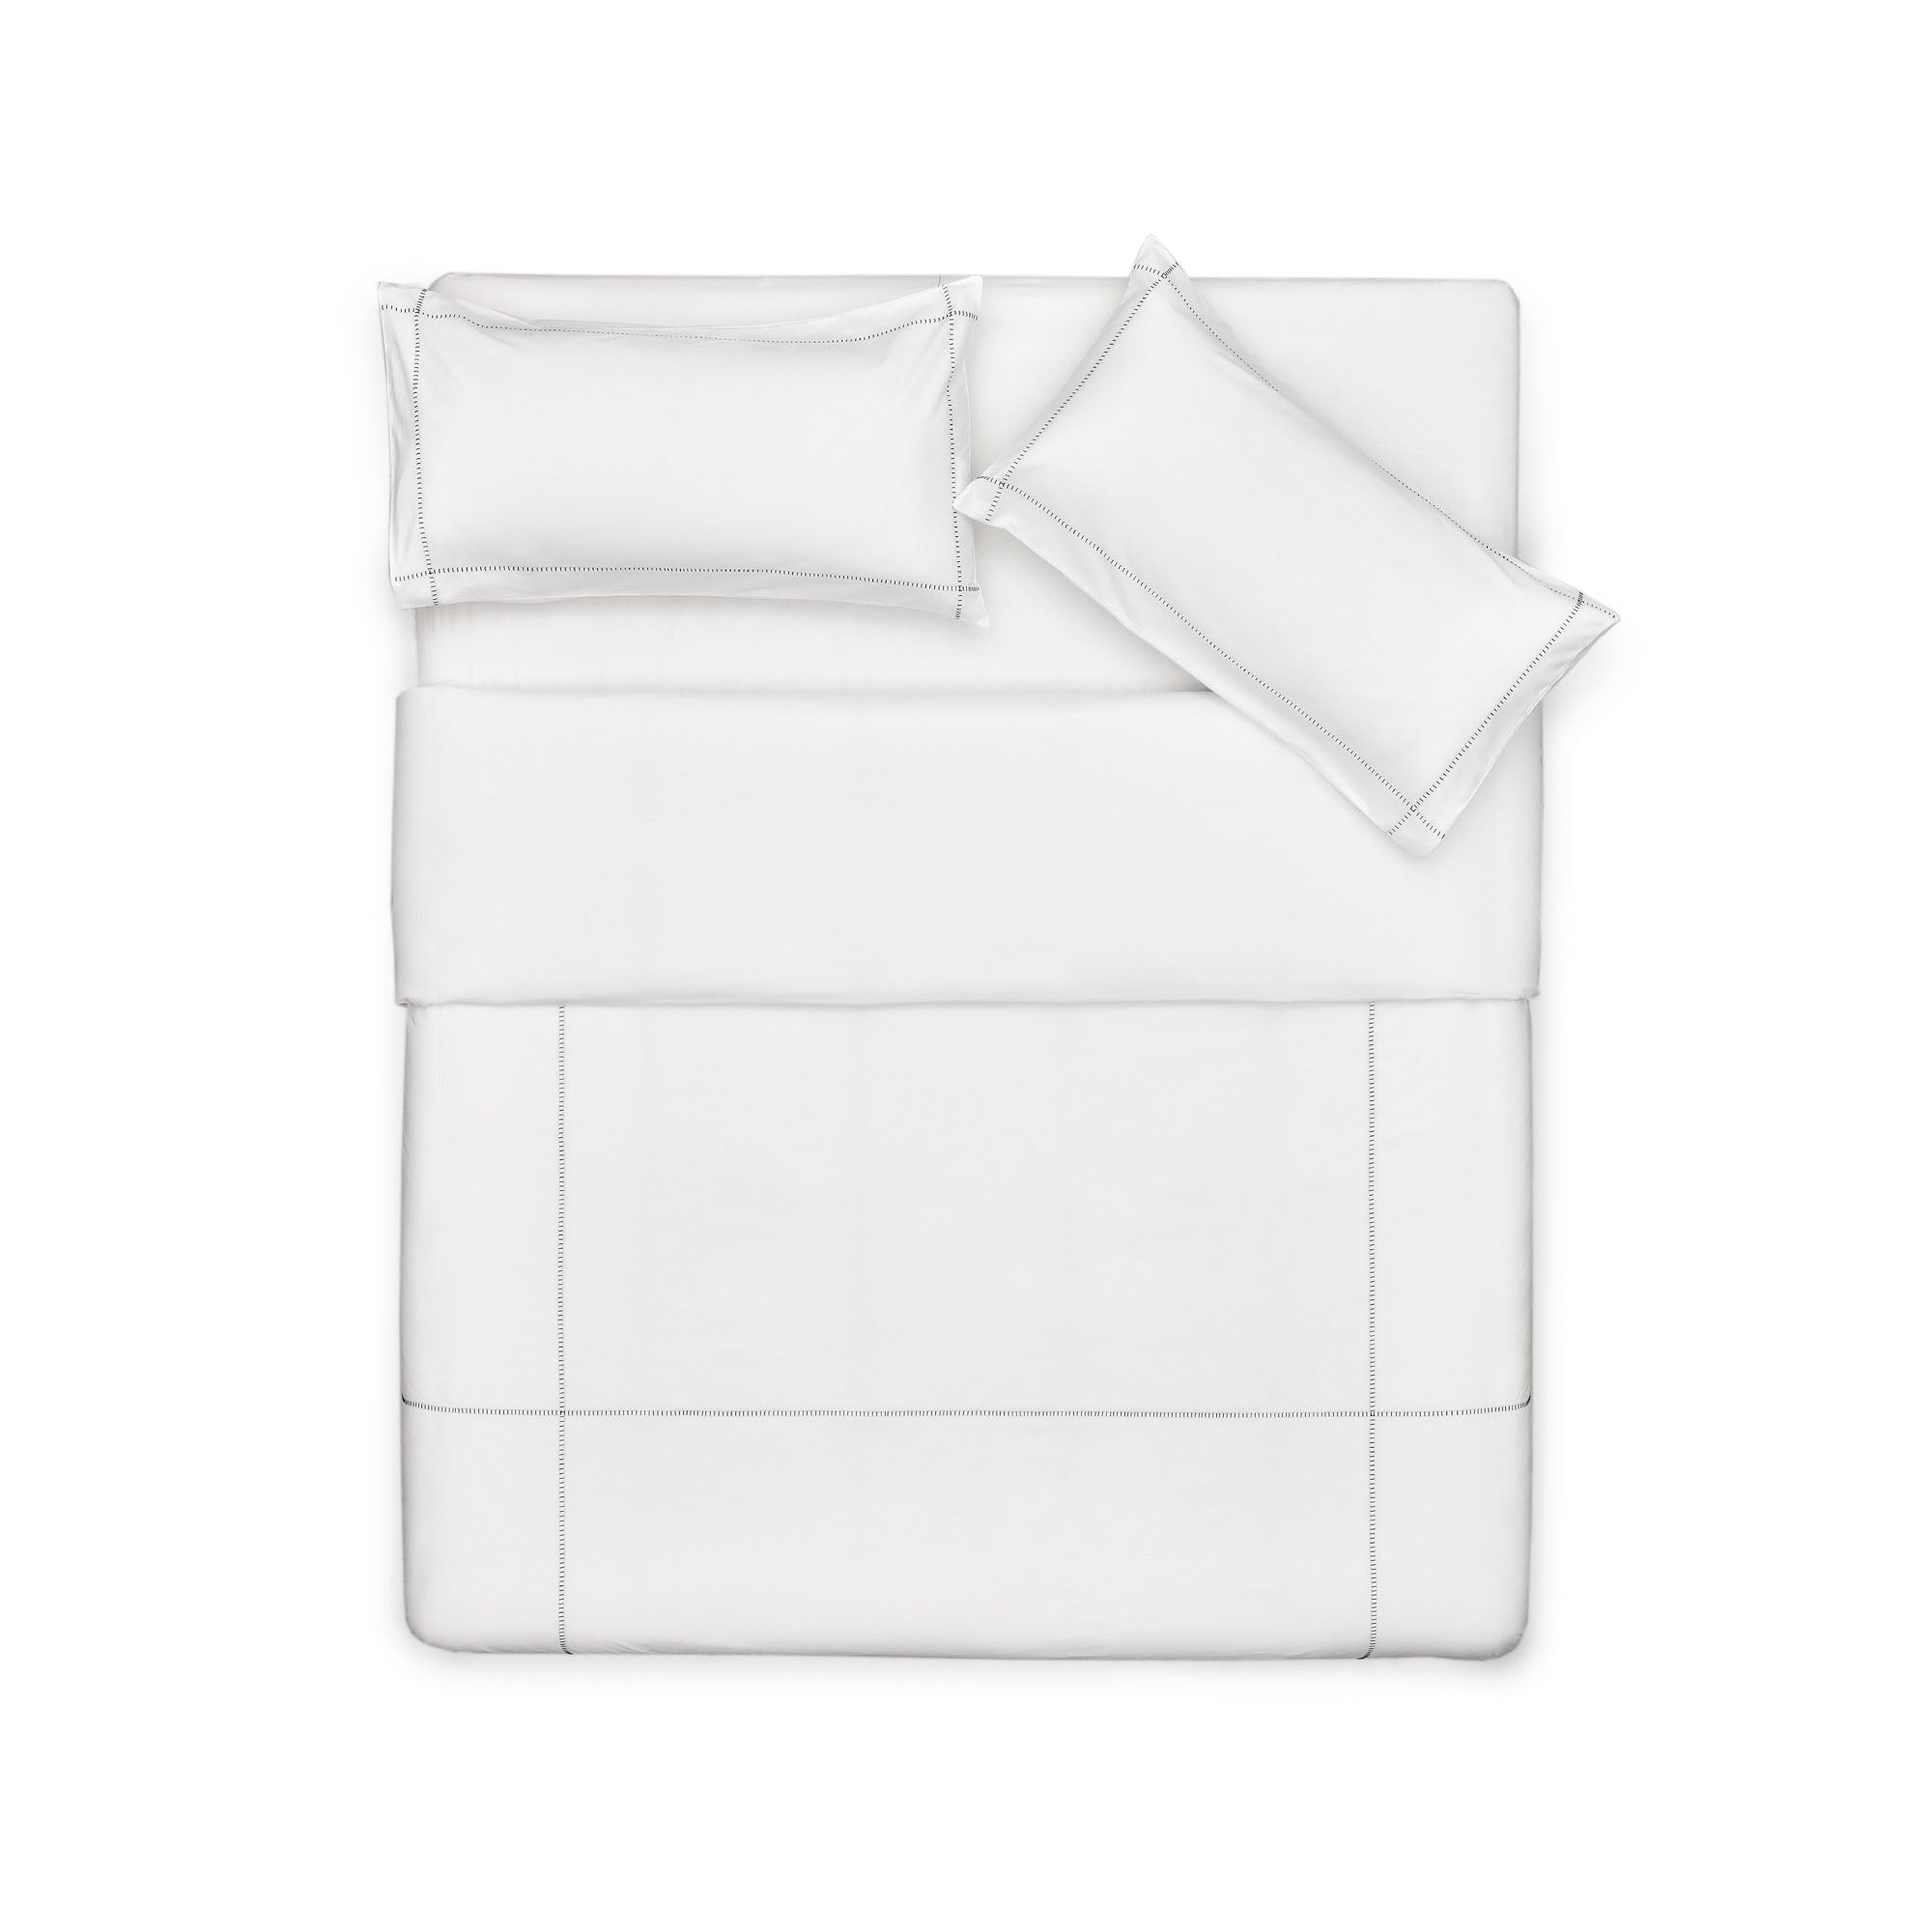 Elvia 100% cotton percale duvet cover and pillow case set, 180 thread count in white, 180 x 200cm